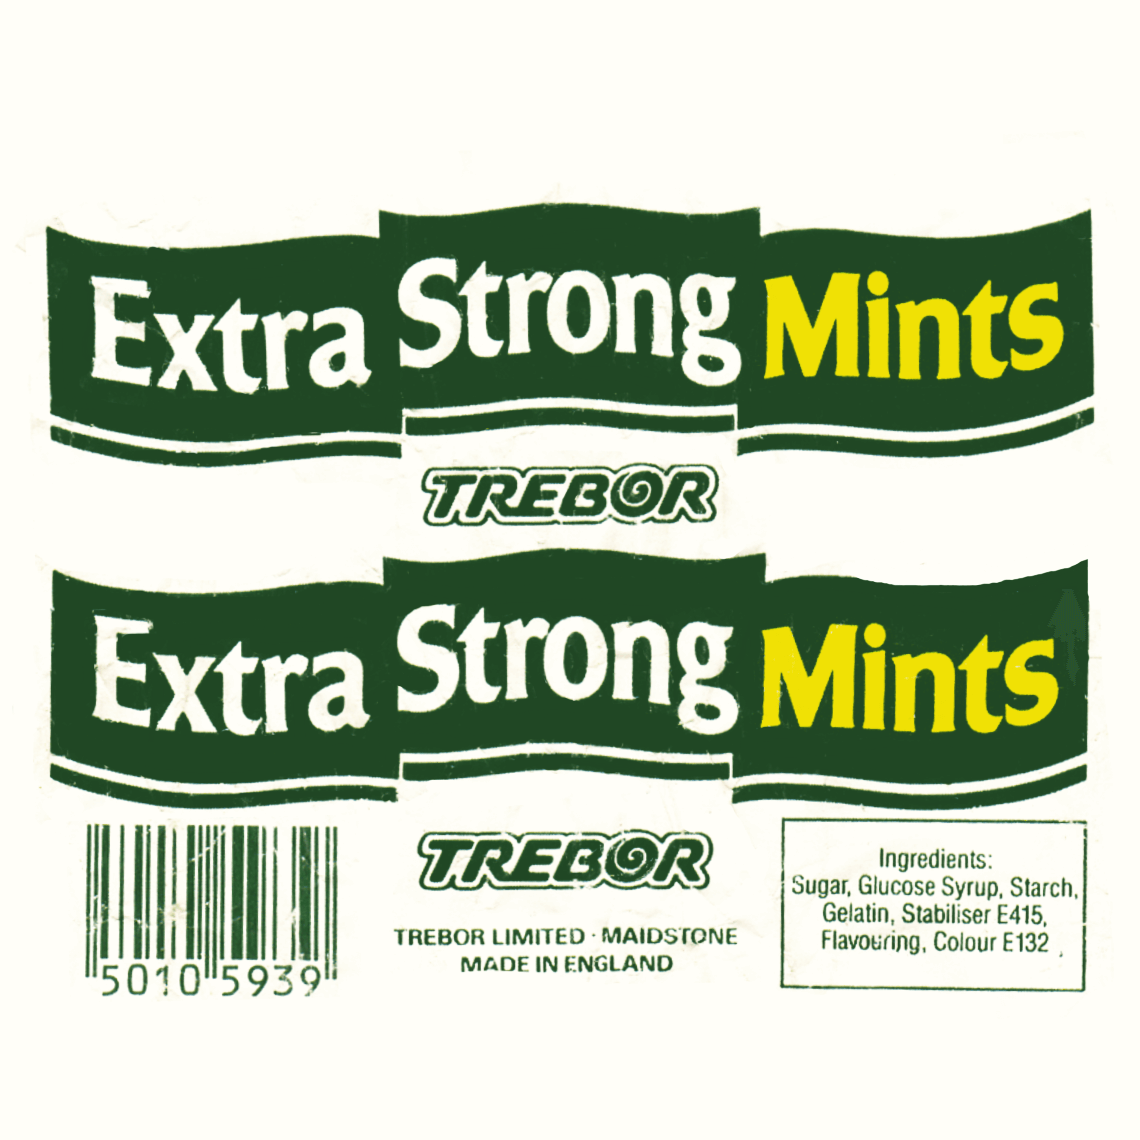 Trebor Extra Strong Mints wrapper design from 1985, green and yellow text with white background